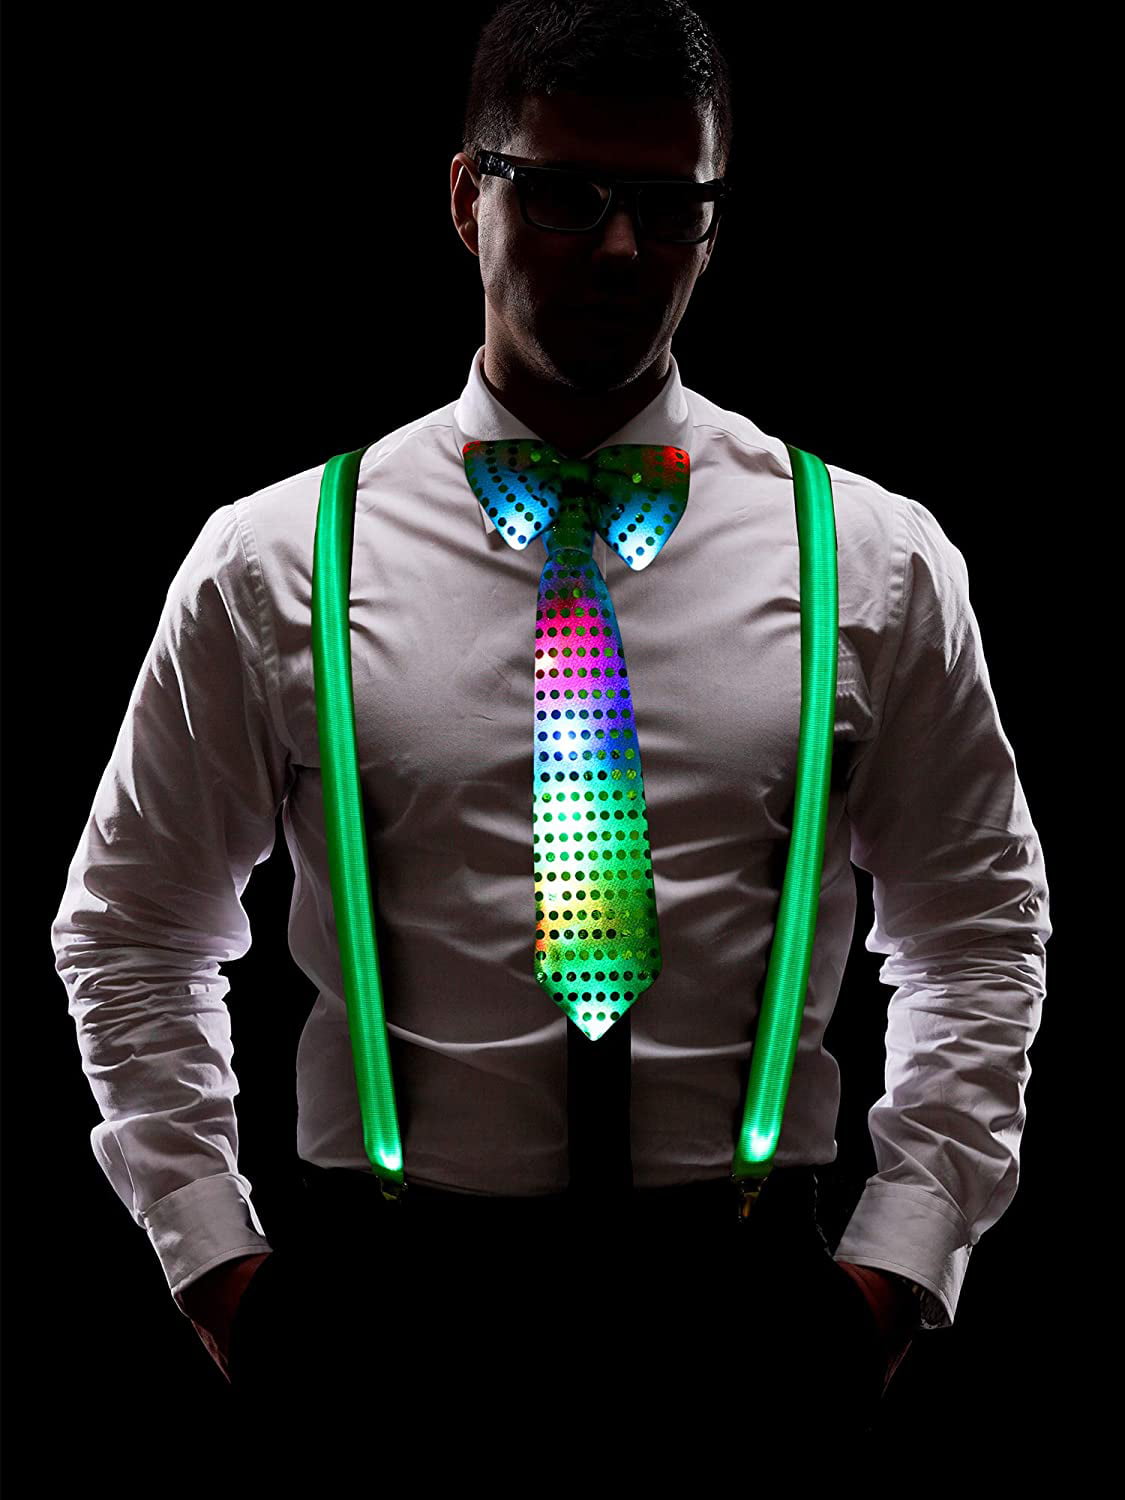 Pre-tied Bowtie and Necktie for Festival Party Supplies Costume Accessory Sets Include Light Up LED Y Back Suspenders